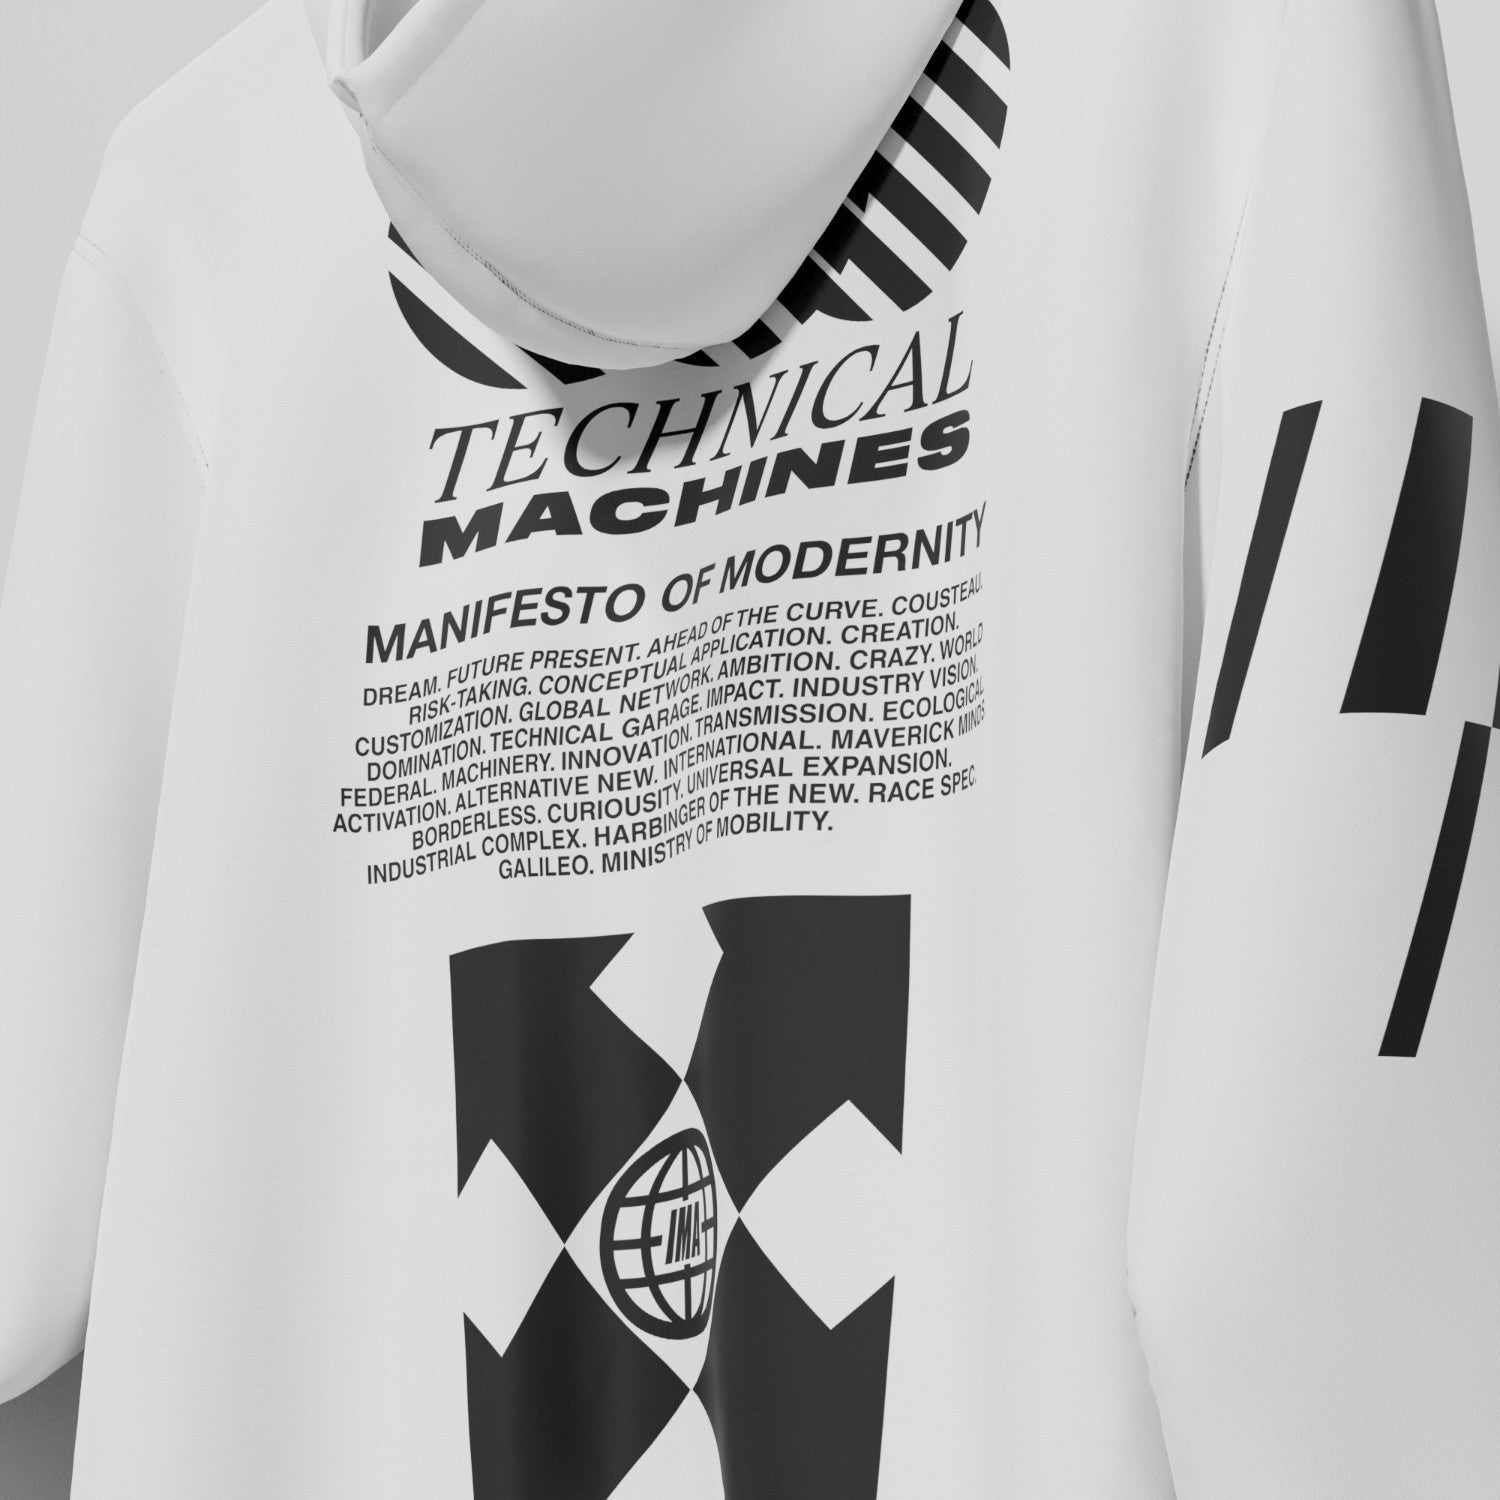 TECHNICAL MACHINES HOODIE WHITE BLACK - TheArsenale